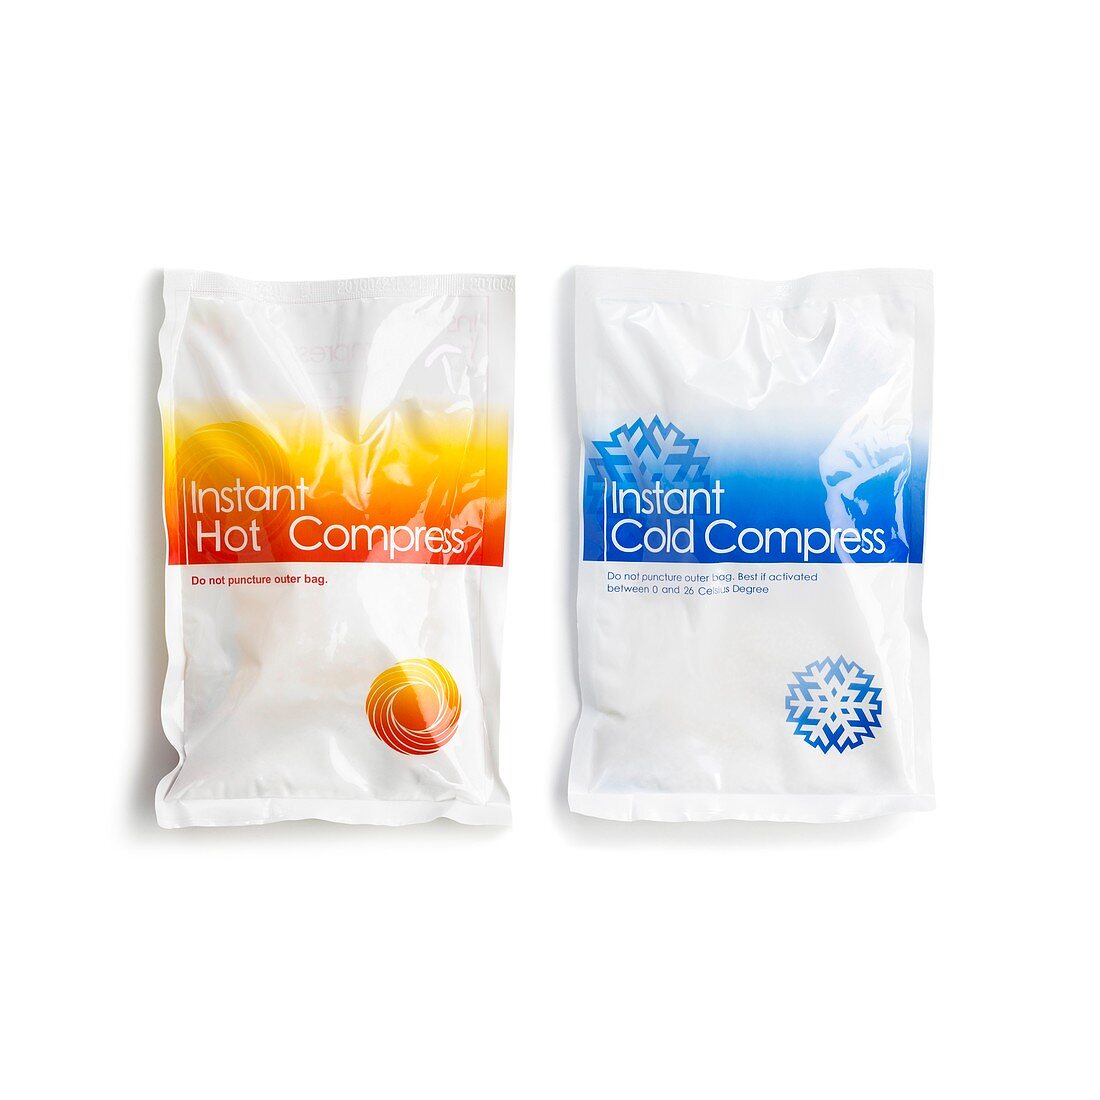 Hot and cold compresses